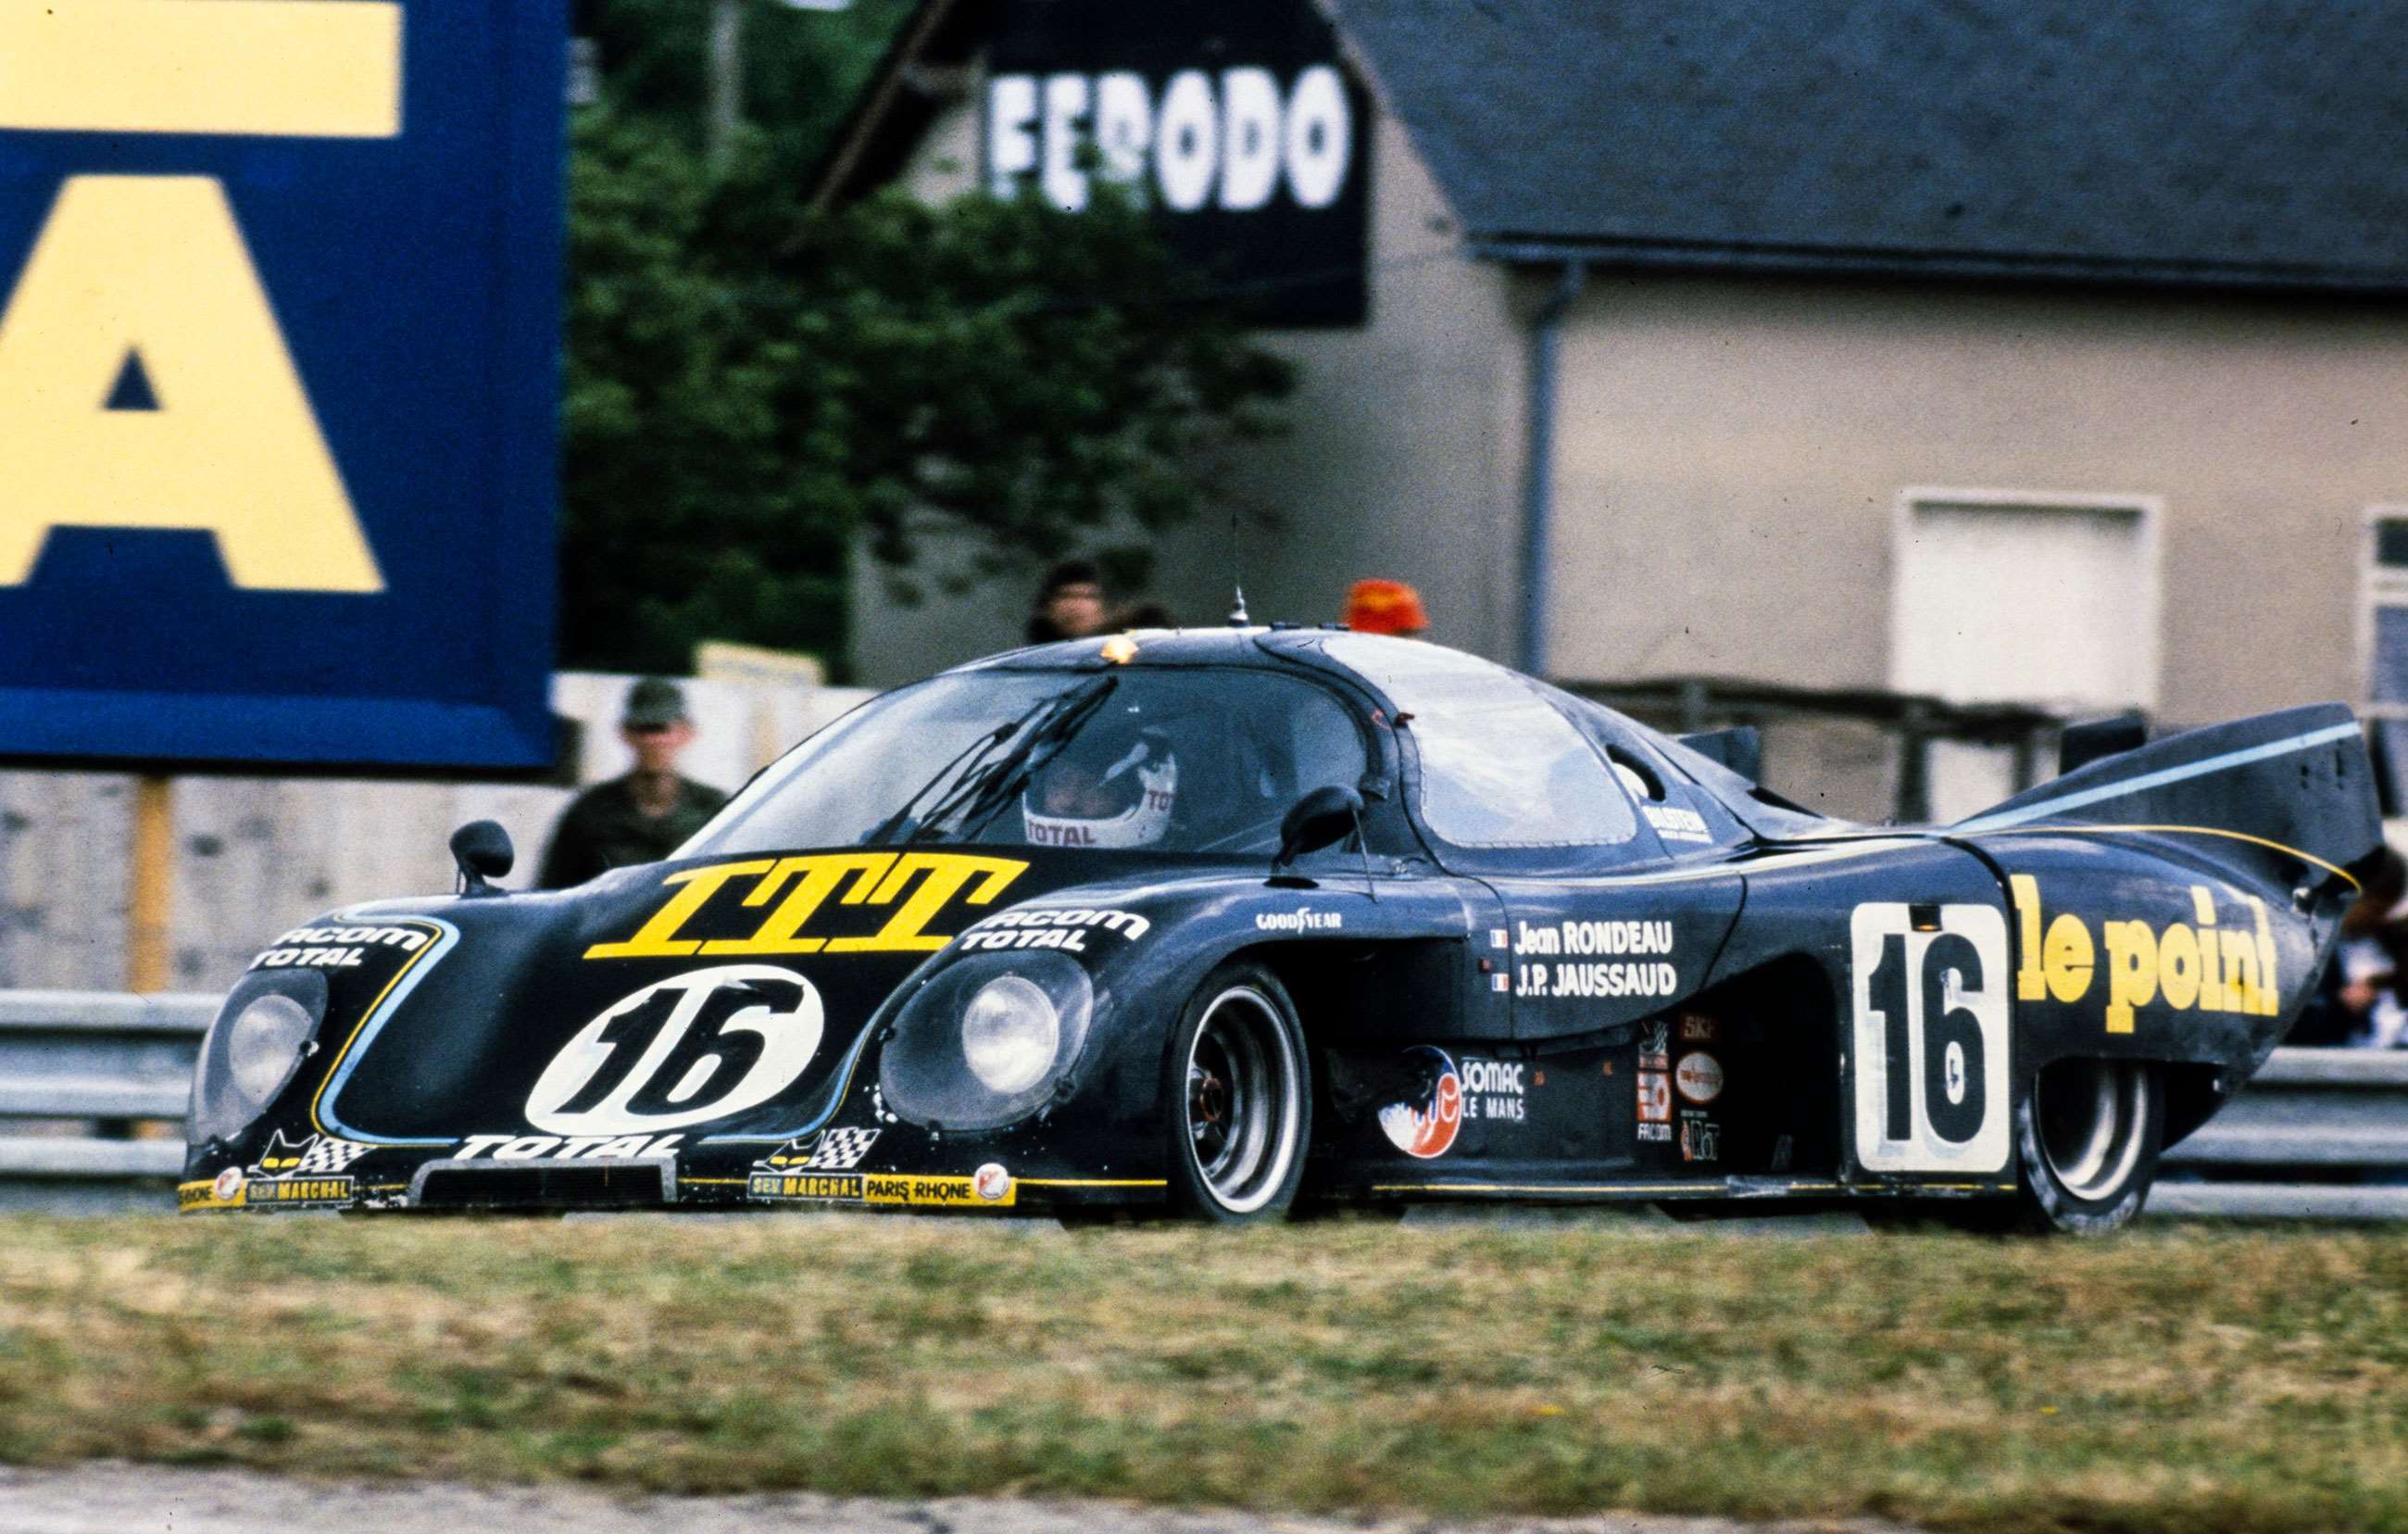 sportscars-to-see-at-the-festival-of-speed-5-rondeau-m379b-jean-rondeau-jean-pierre-jaussaud-le-mans-1980-mi-goodwood-07072021.jpg